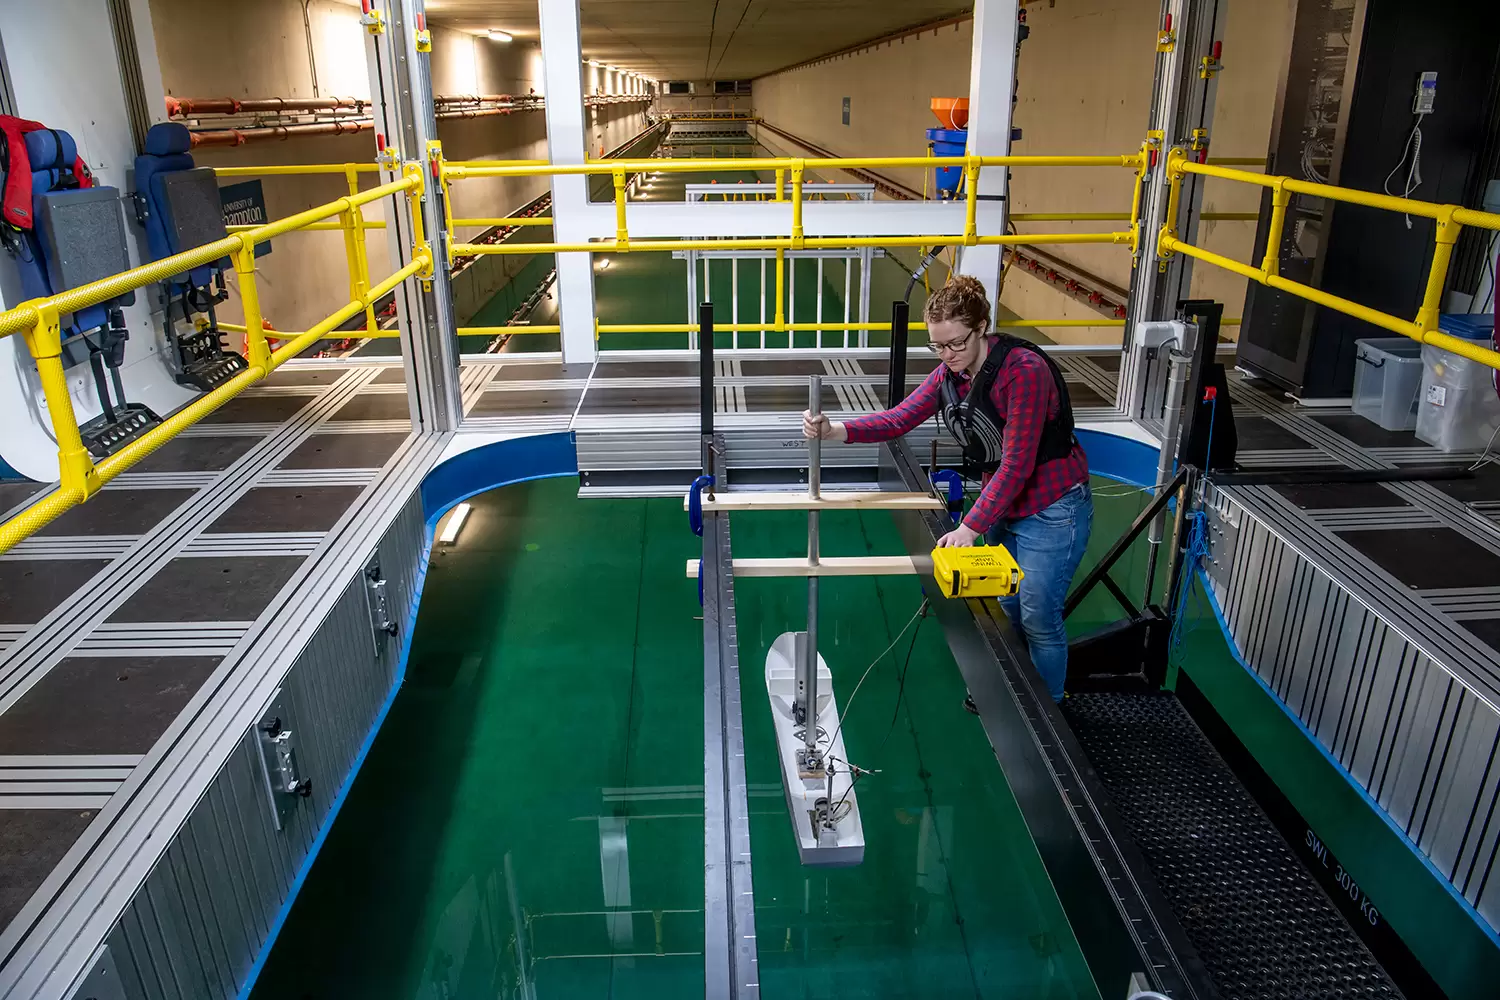 The University of Southampton’s 138m towing tank is frequently used by undergraduate ship science students to explore hydrodynamics. (Image: © University of Southampton)